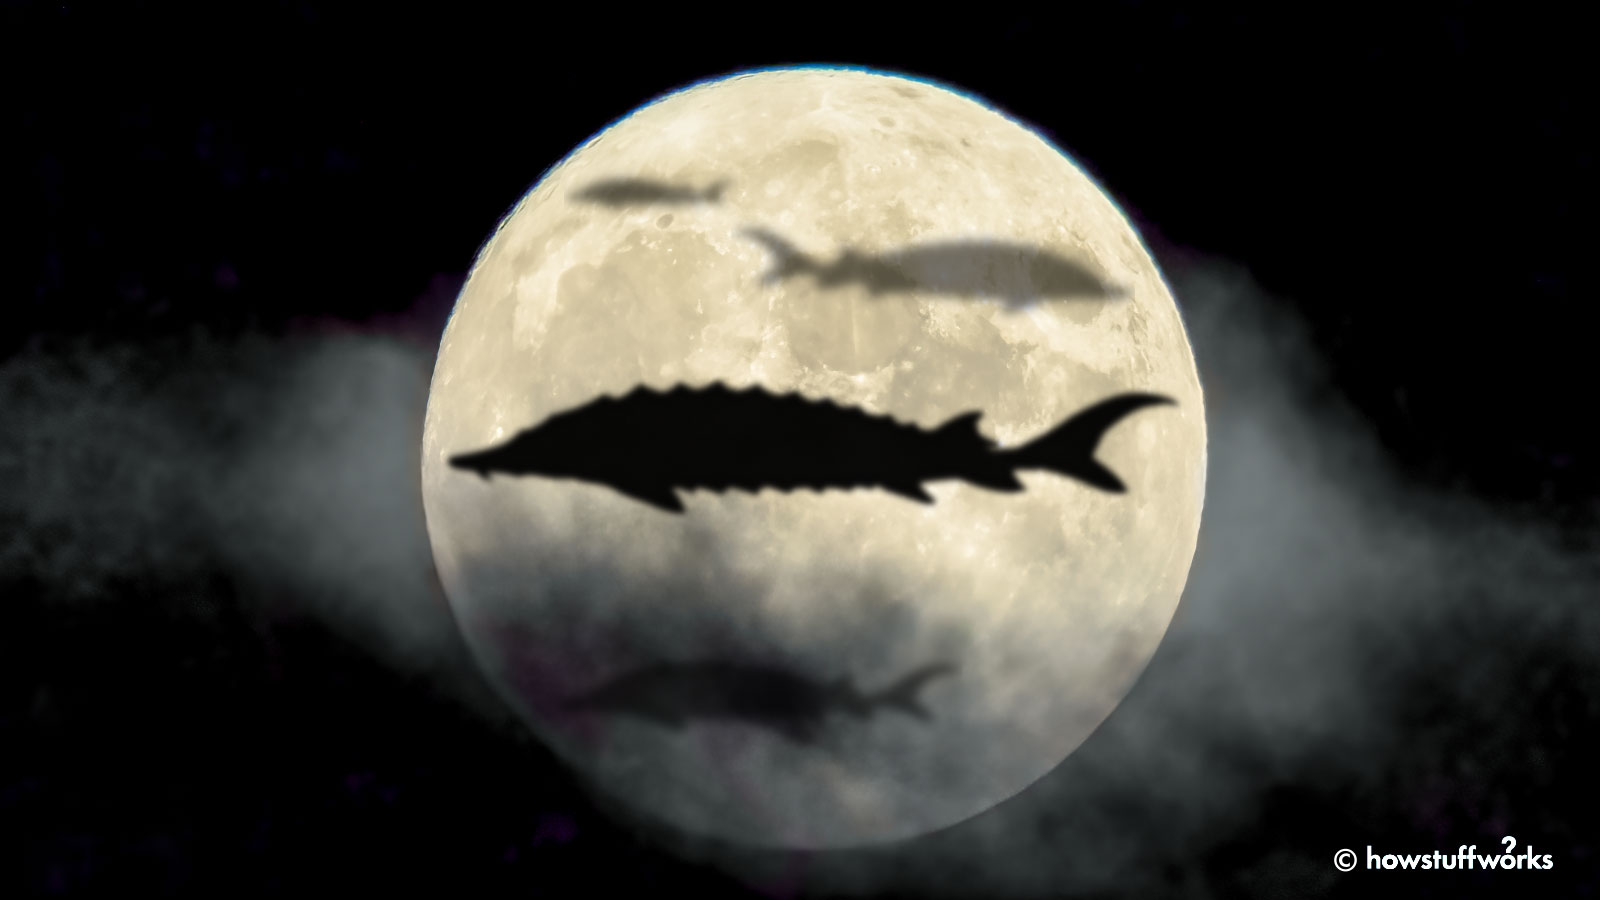 The shadow of four sturgeon fish inside a full moon.